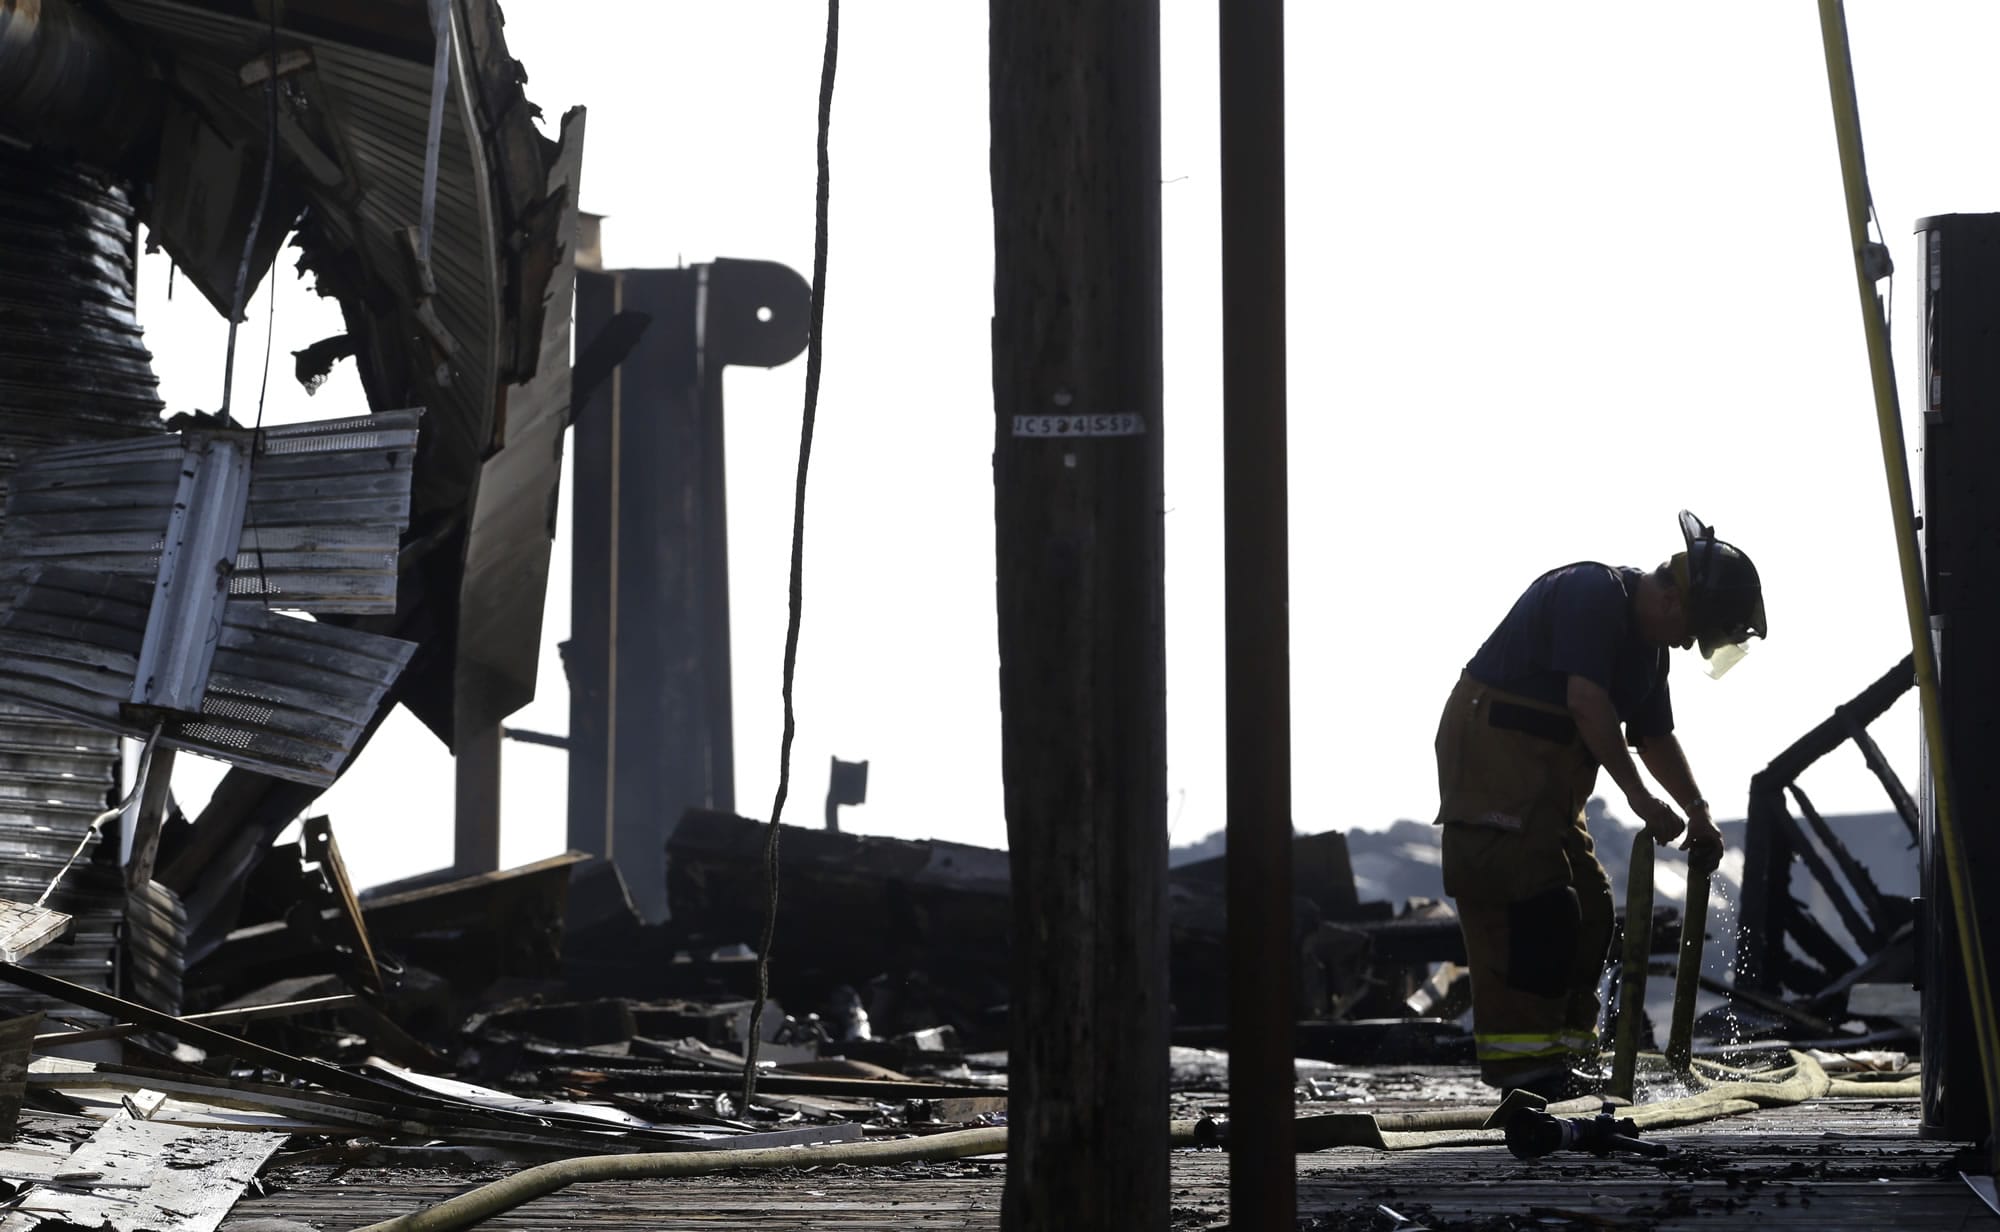 A firefighter disconnects two hoses the morning after a fire burned a large portion of the Seaside Park boardwalk, Friday in Seaside Park, N.J.